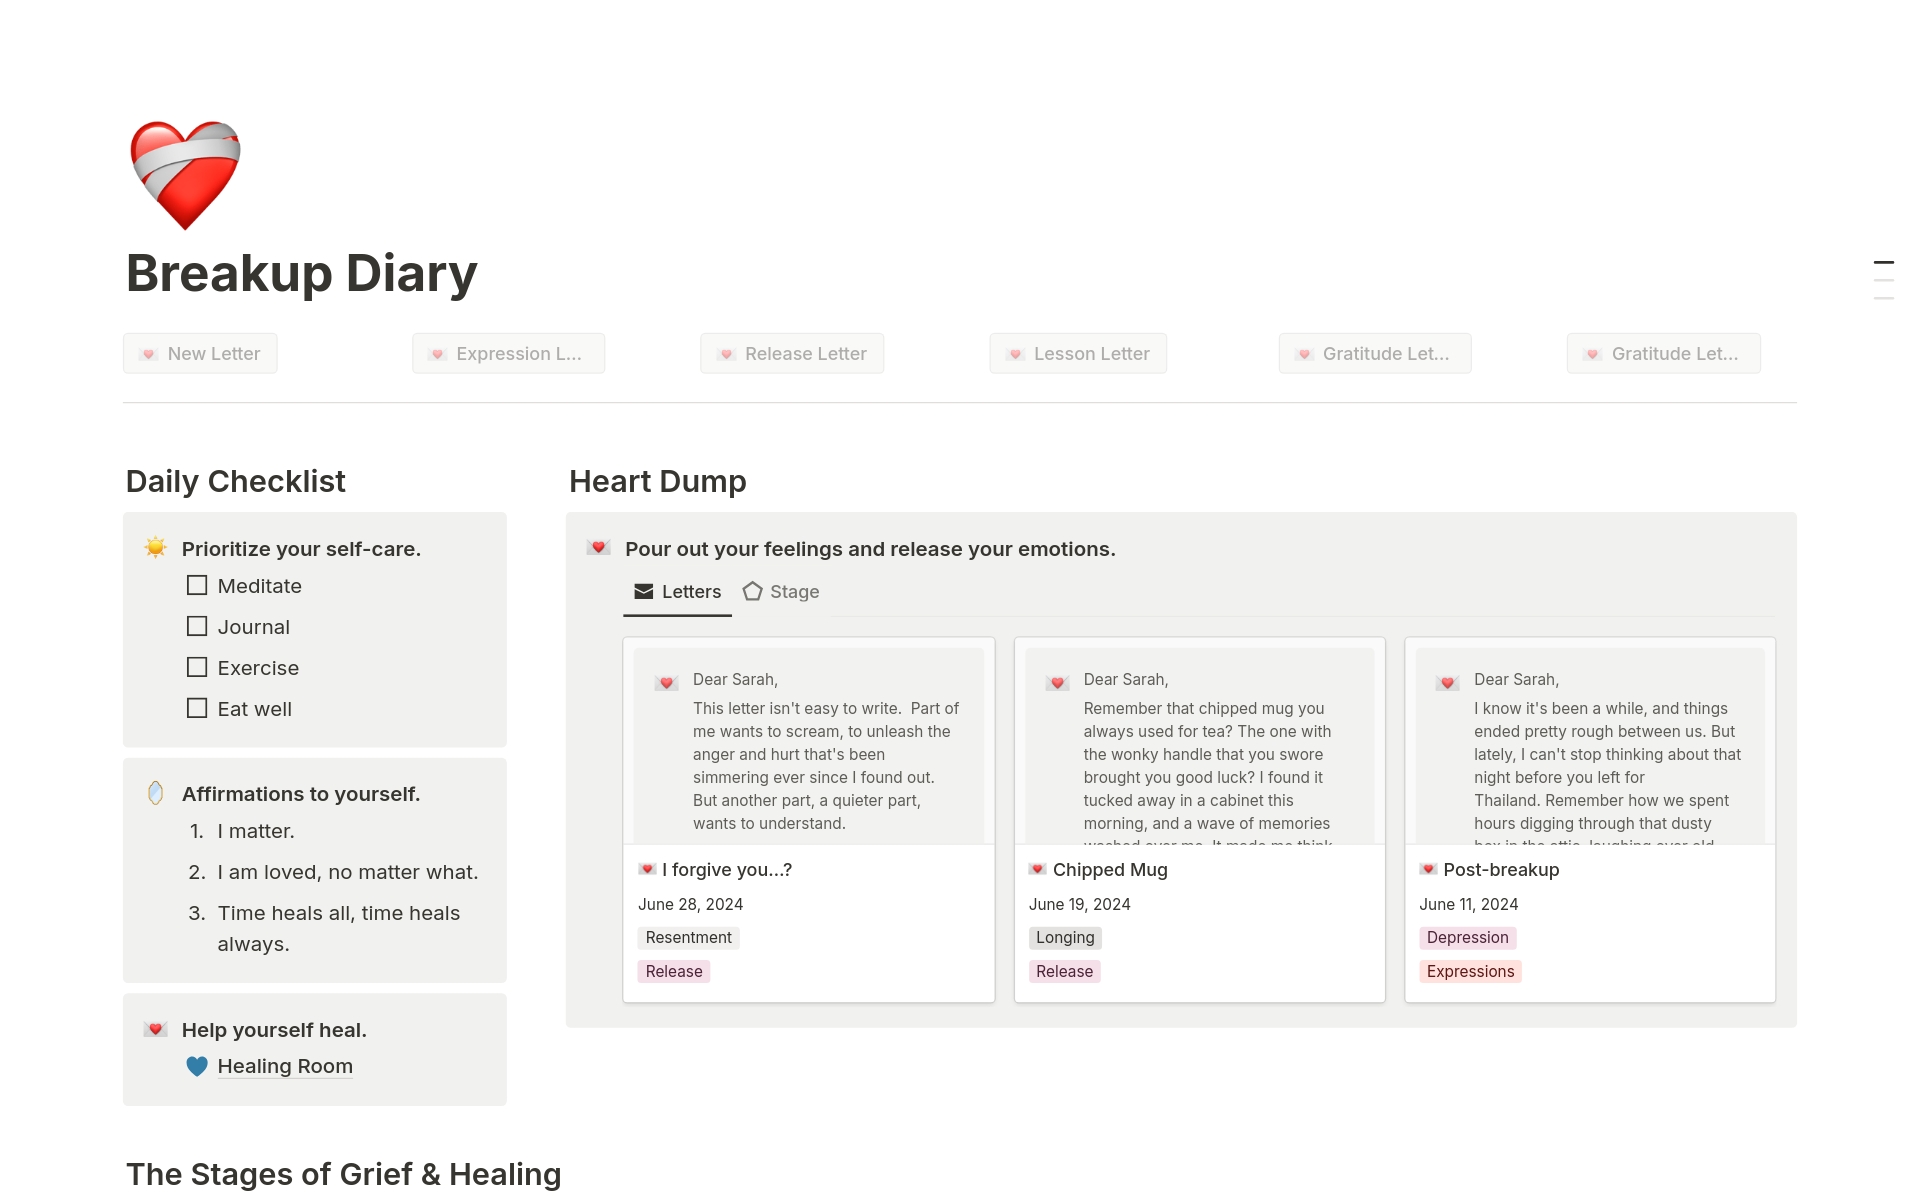 Breakup Diary is a guided companion on the path to healing. This easy-to-use Notion template leverages the 5 stages of grief to help you healthily process your emotions. Craft private letters to express yourself, learn how to heal post-breakup, and use guided meditation.